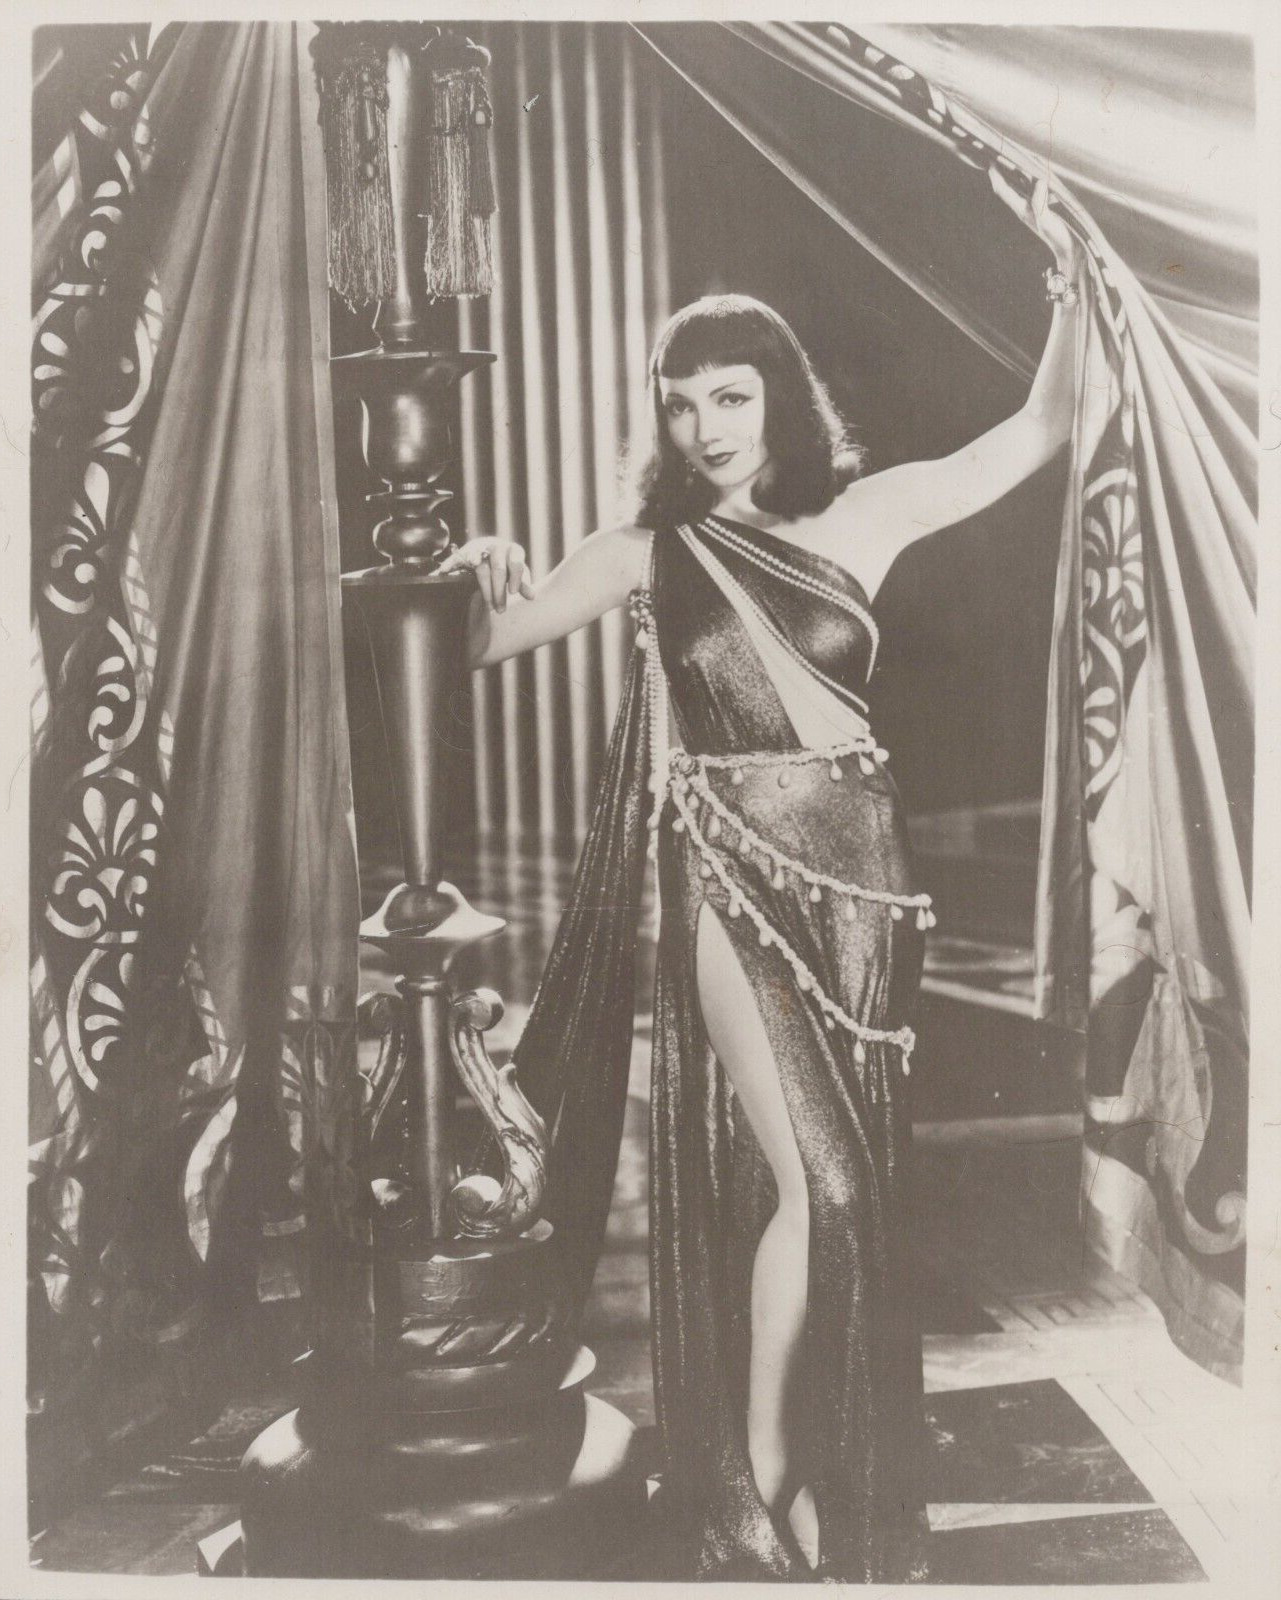 HOLLYWOOD BEAUTY CLAUDETTE COLBERT in CLEOPATRA PORTRAIT 1950s VINTAGE Photo C41